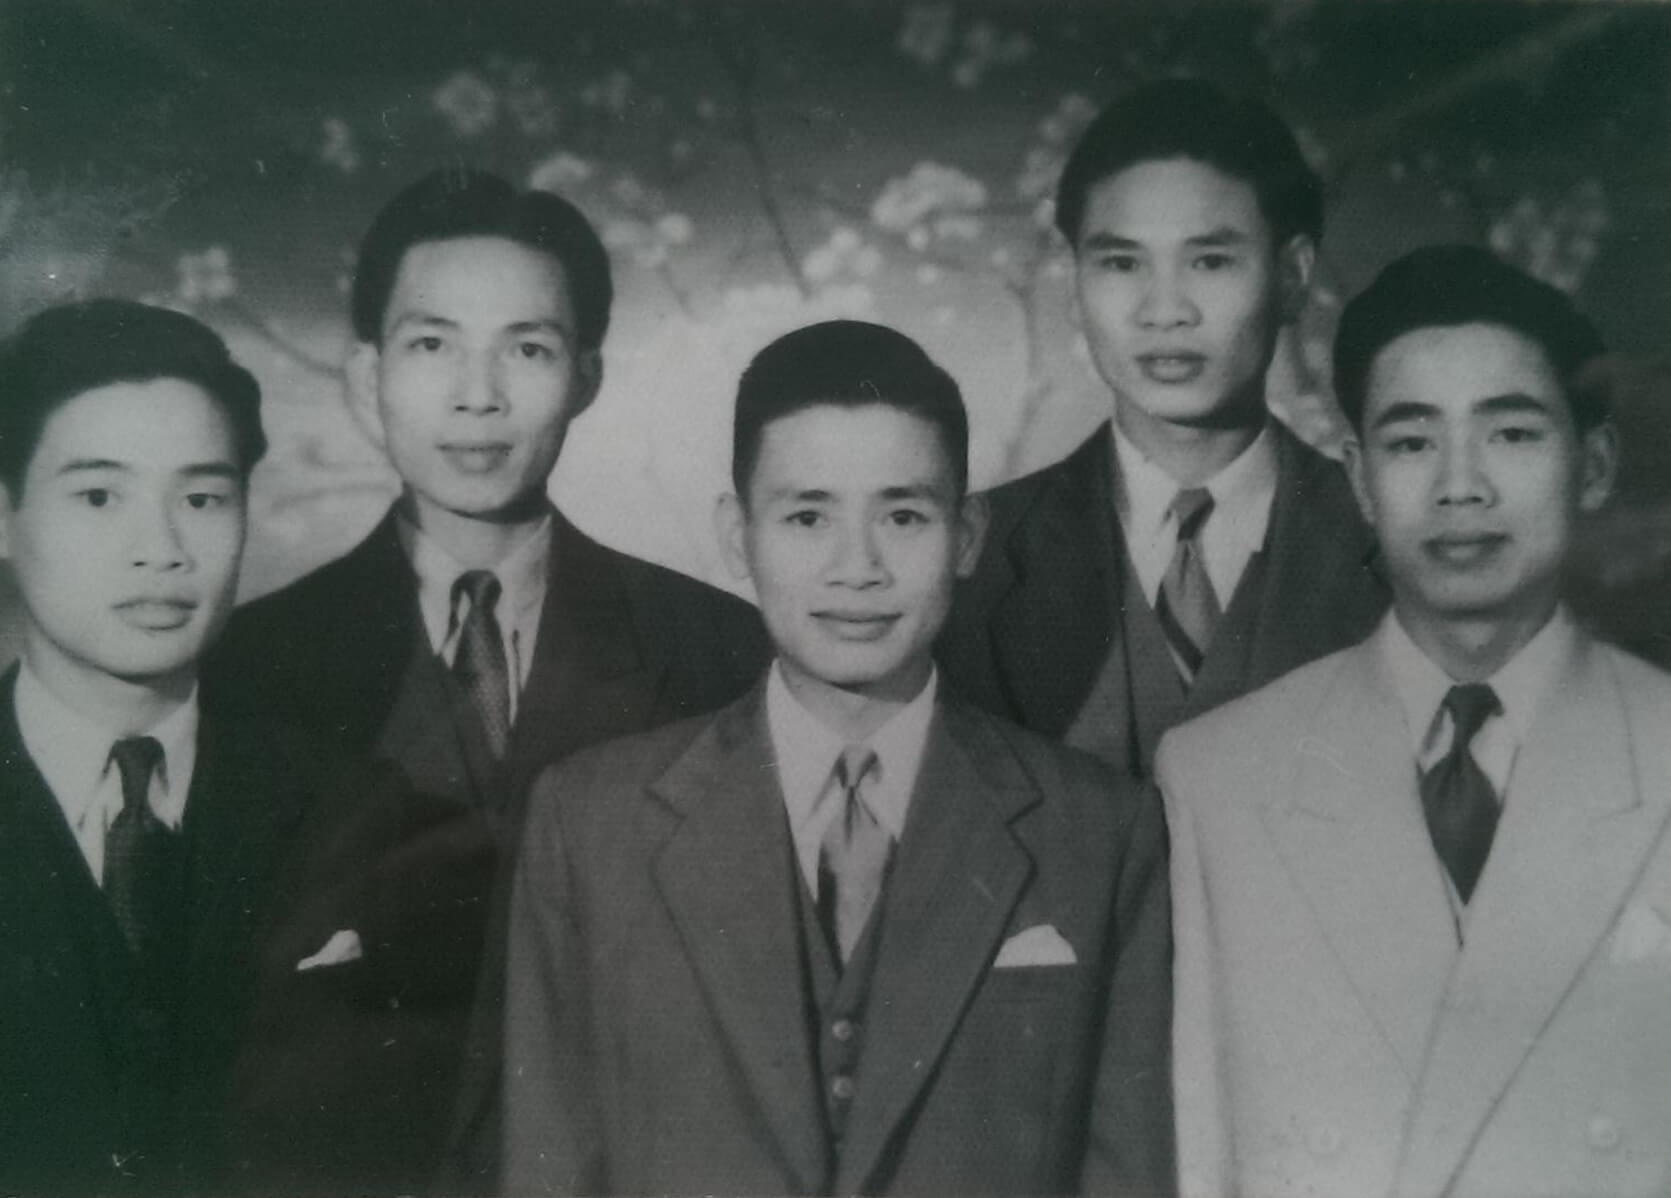 Black and white photo pf five young Vietnamese men in suits.